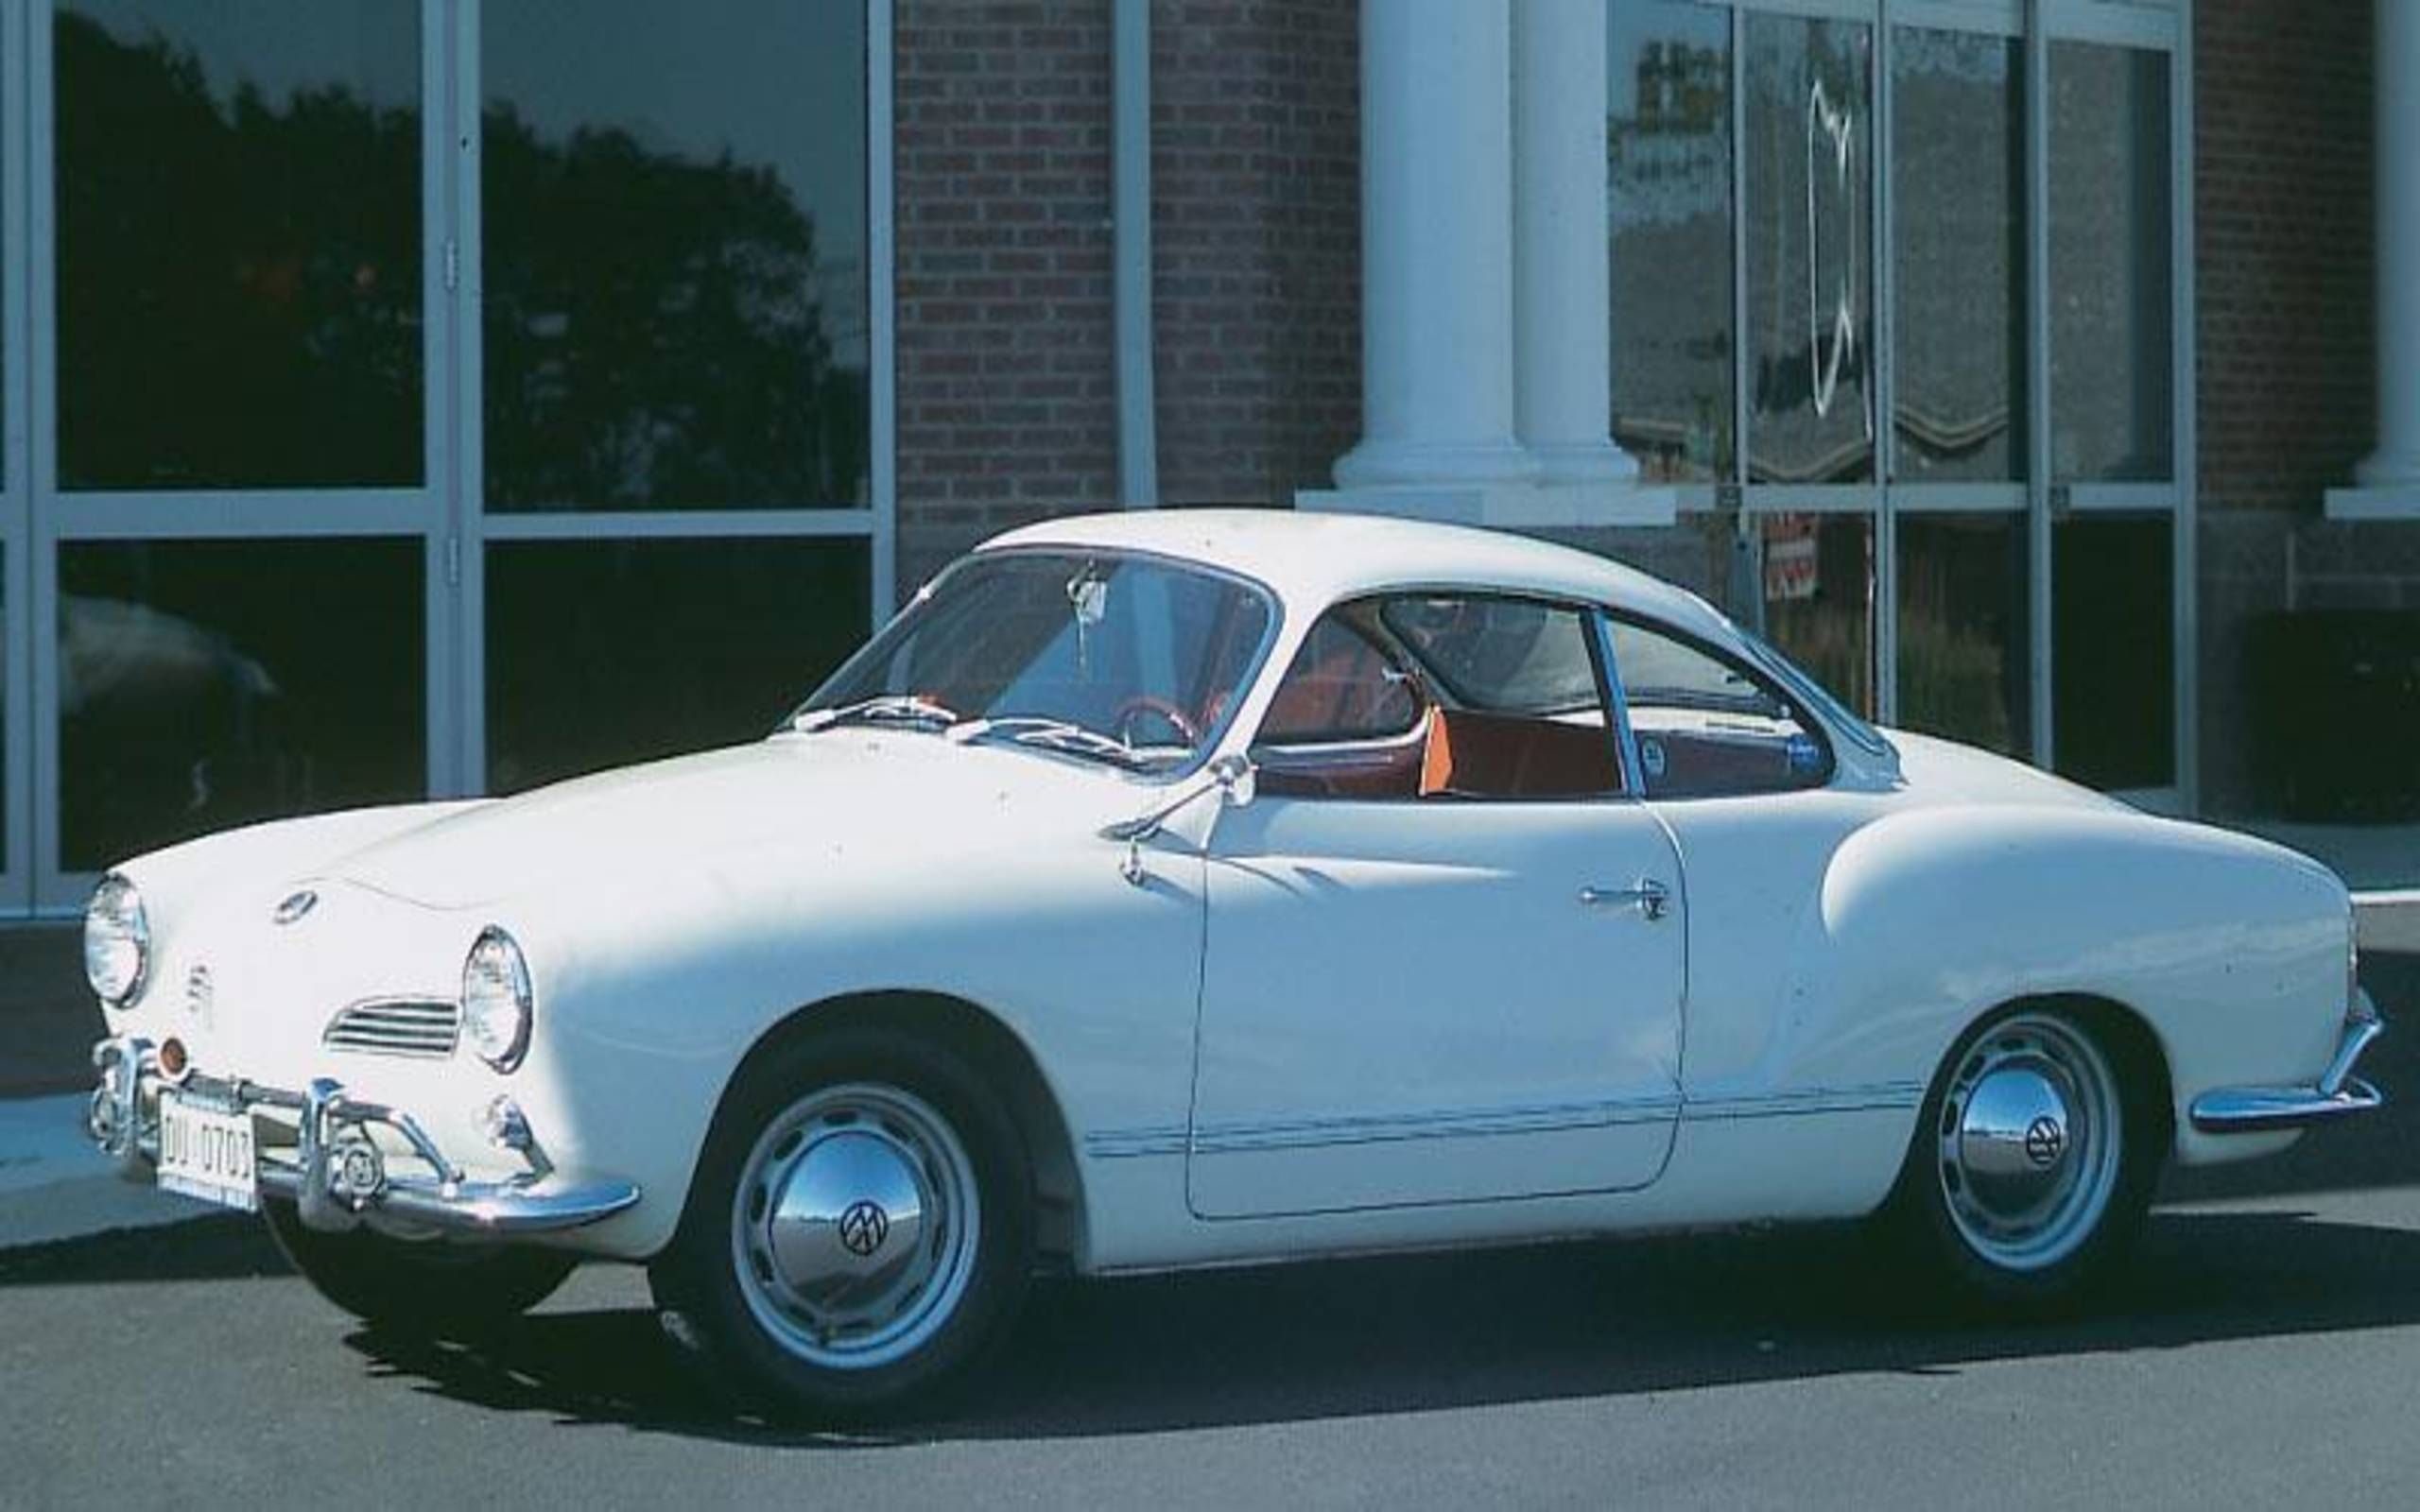 1963 Volkswagen Karmann-Ghia: The affordable sports car of the '60s.